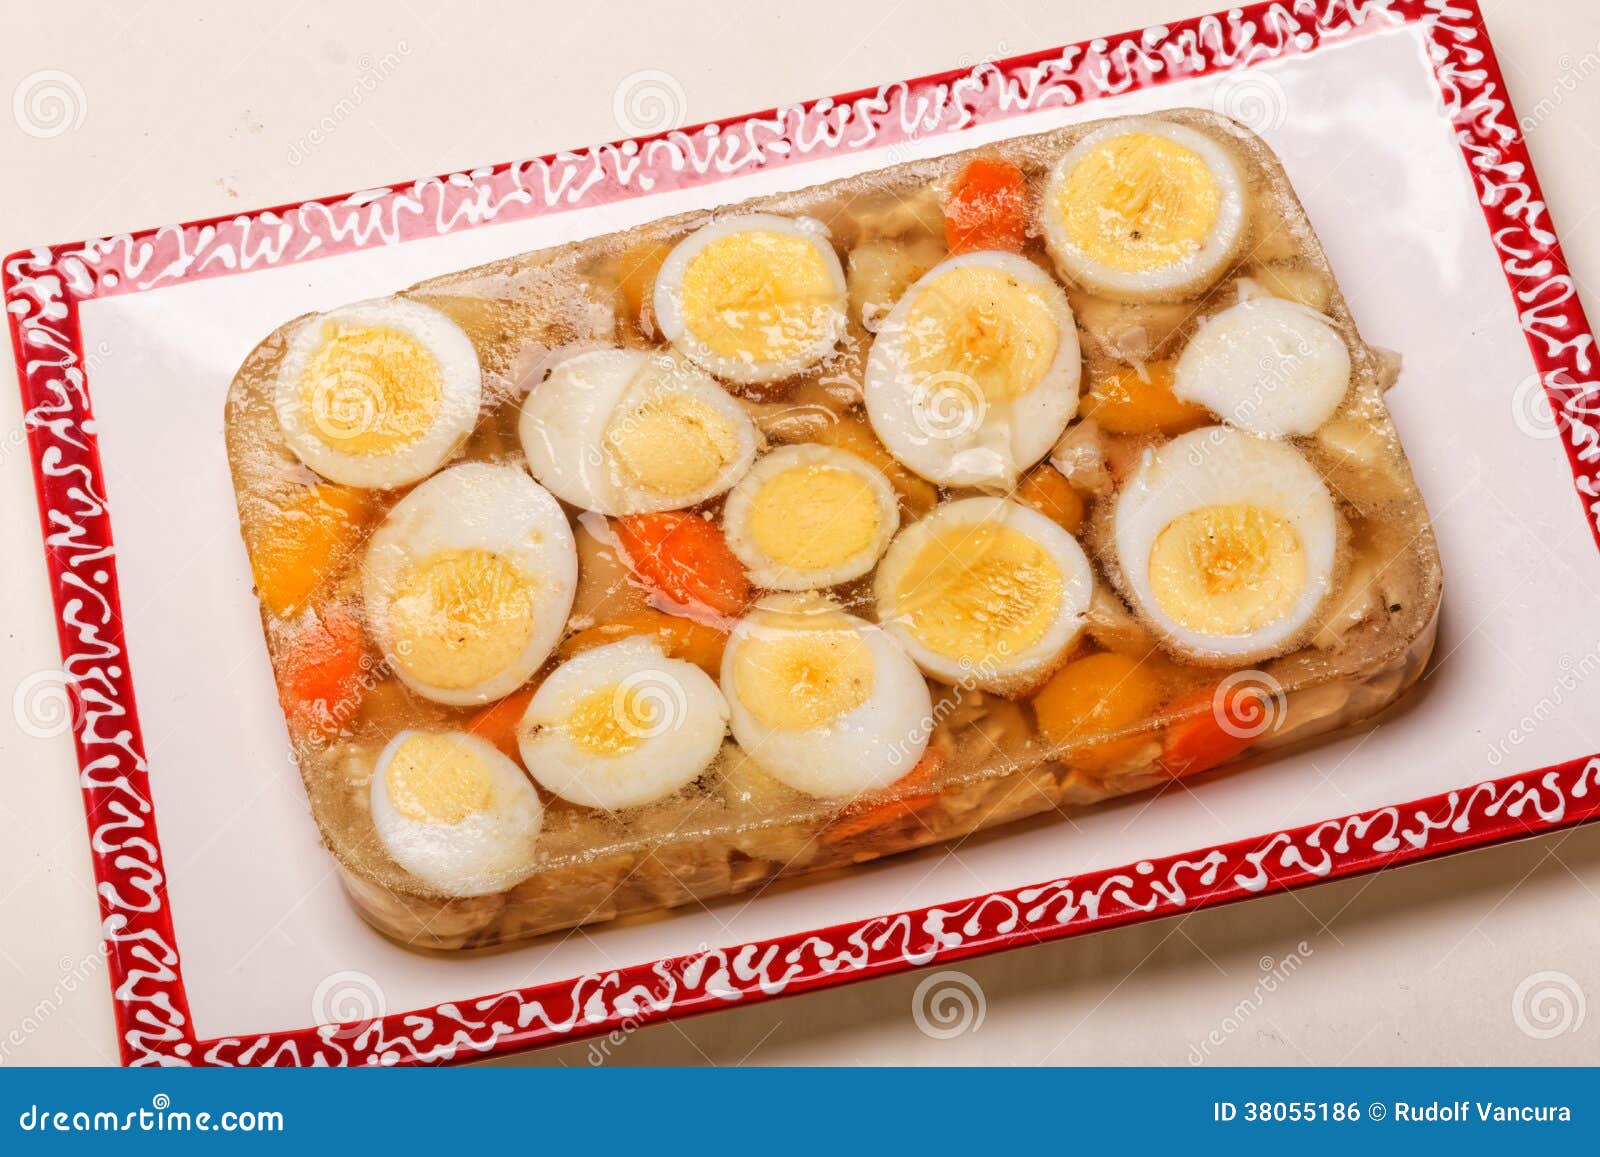 aspic of boiled eggs and chicken on plate